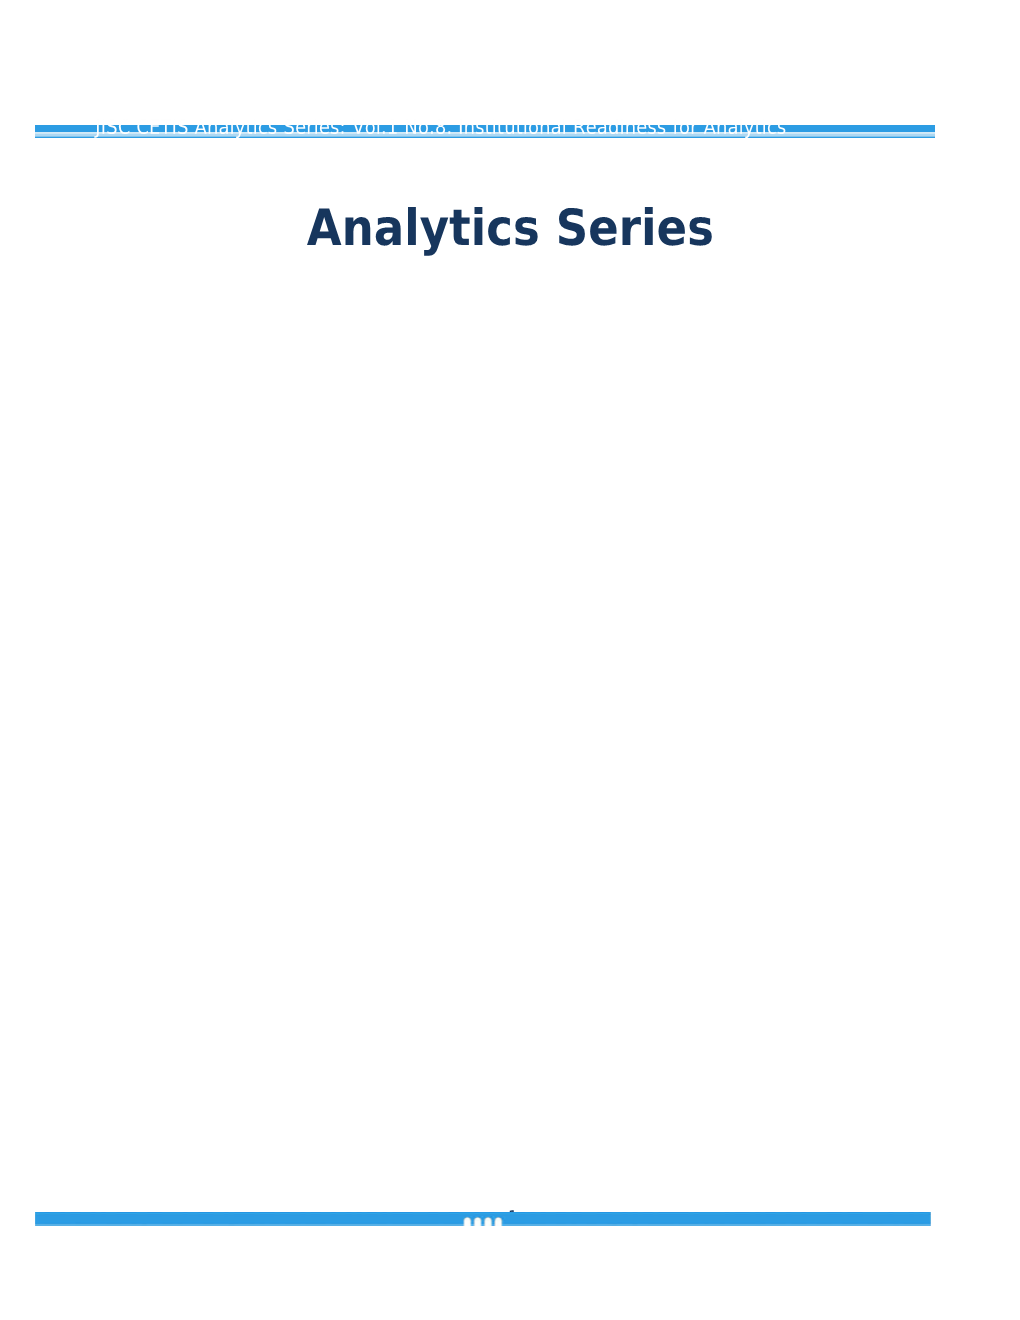 Vol.1, No.8, Institutional Readiness for Analytics